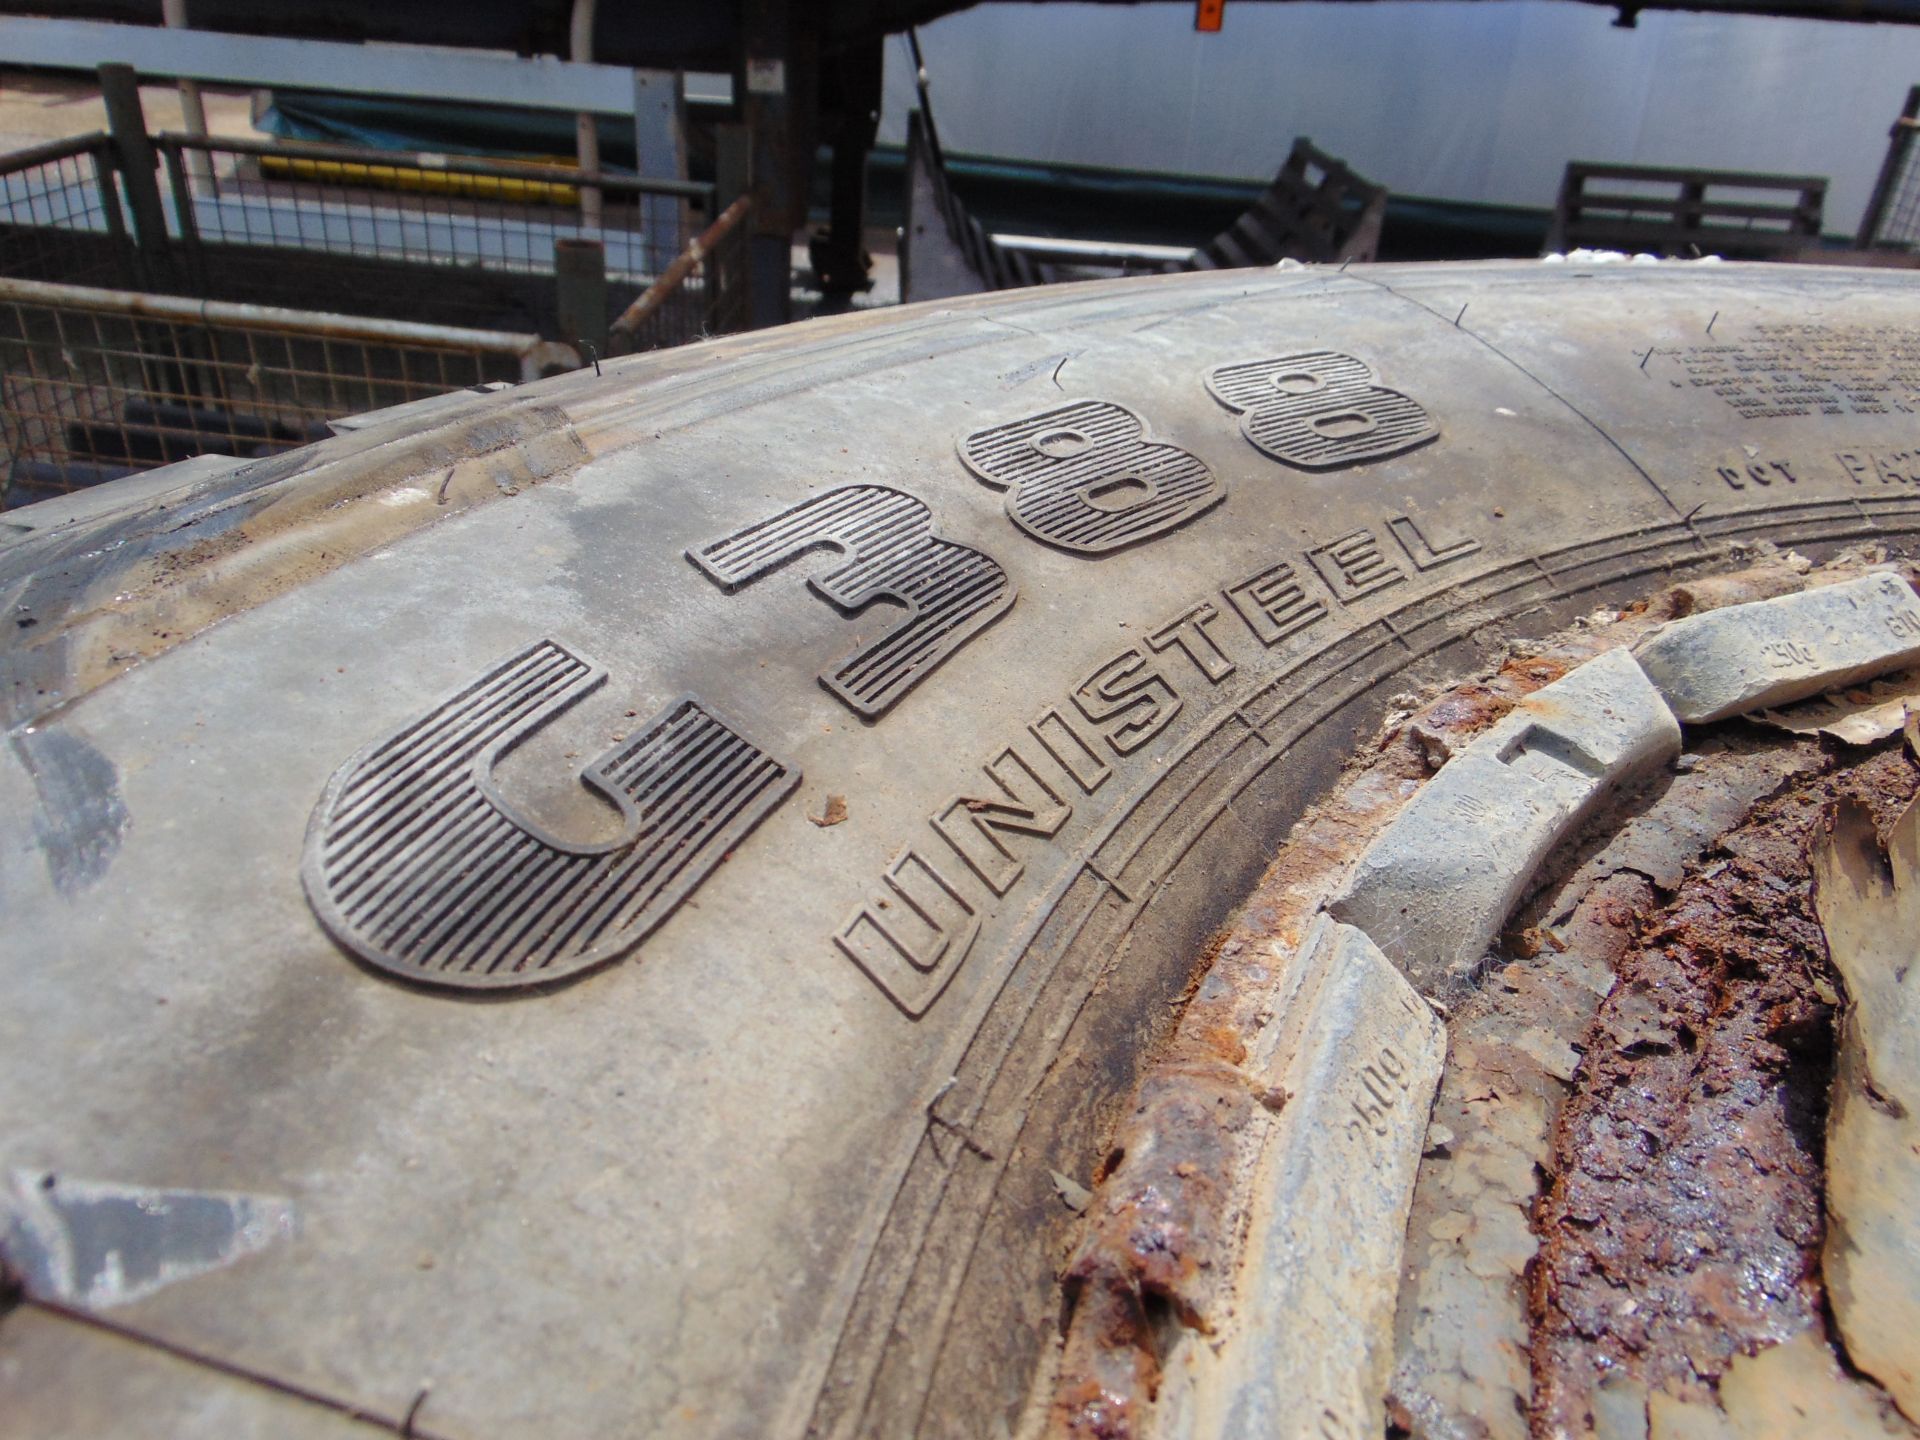 Qty 4 x Goodyear 12.00R20 G388 Unisteel tyres, unused still with bobbles fitted on 8 stud rims - Image 5 of 6